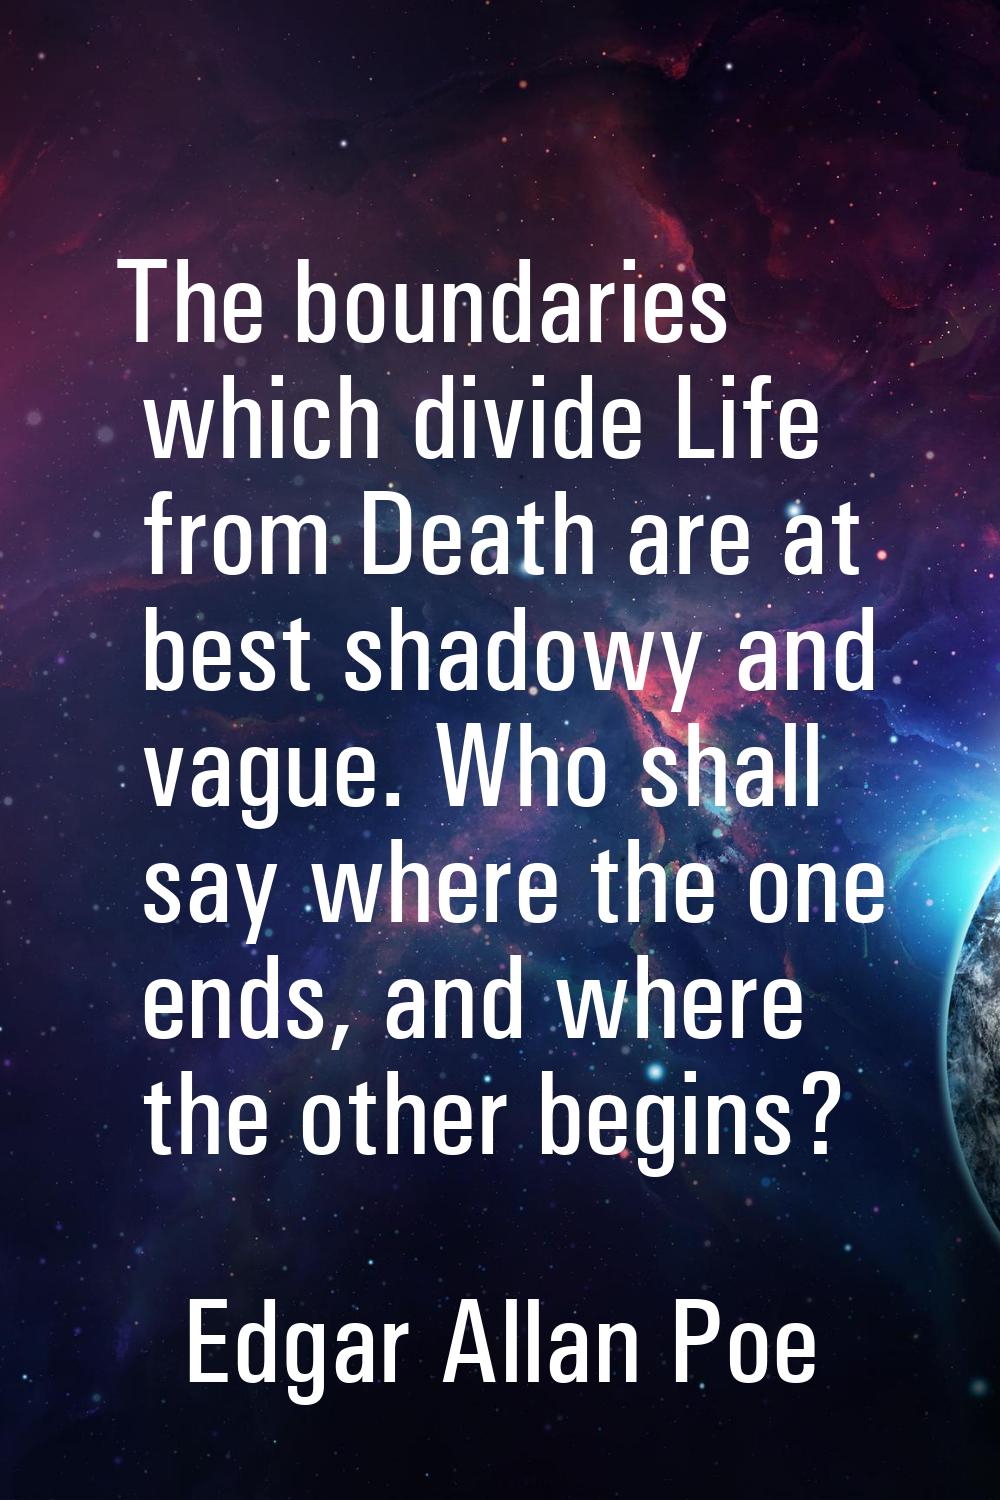 The boundaries which divide Life from Death are at best shadowy and vague. Who shall say where the 